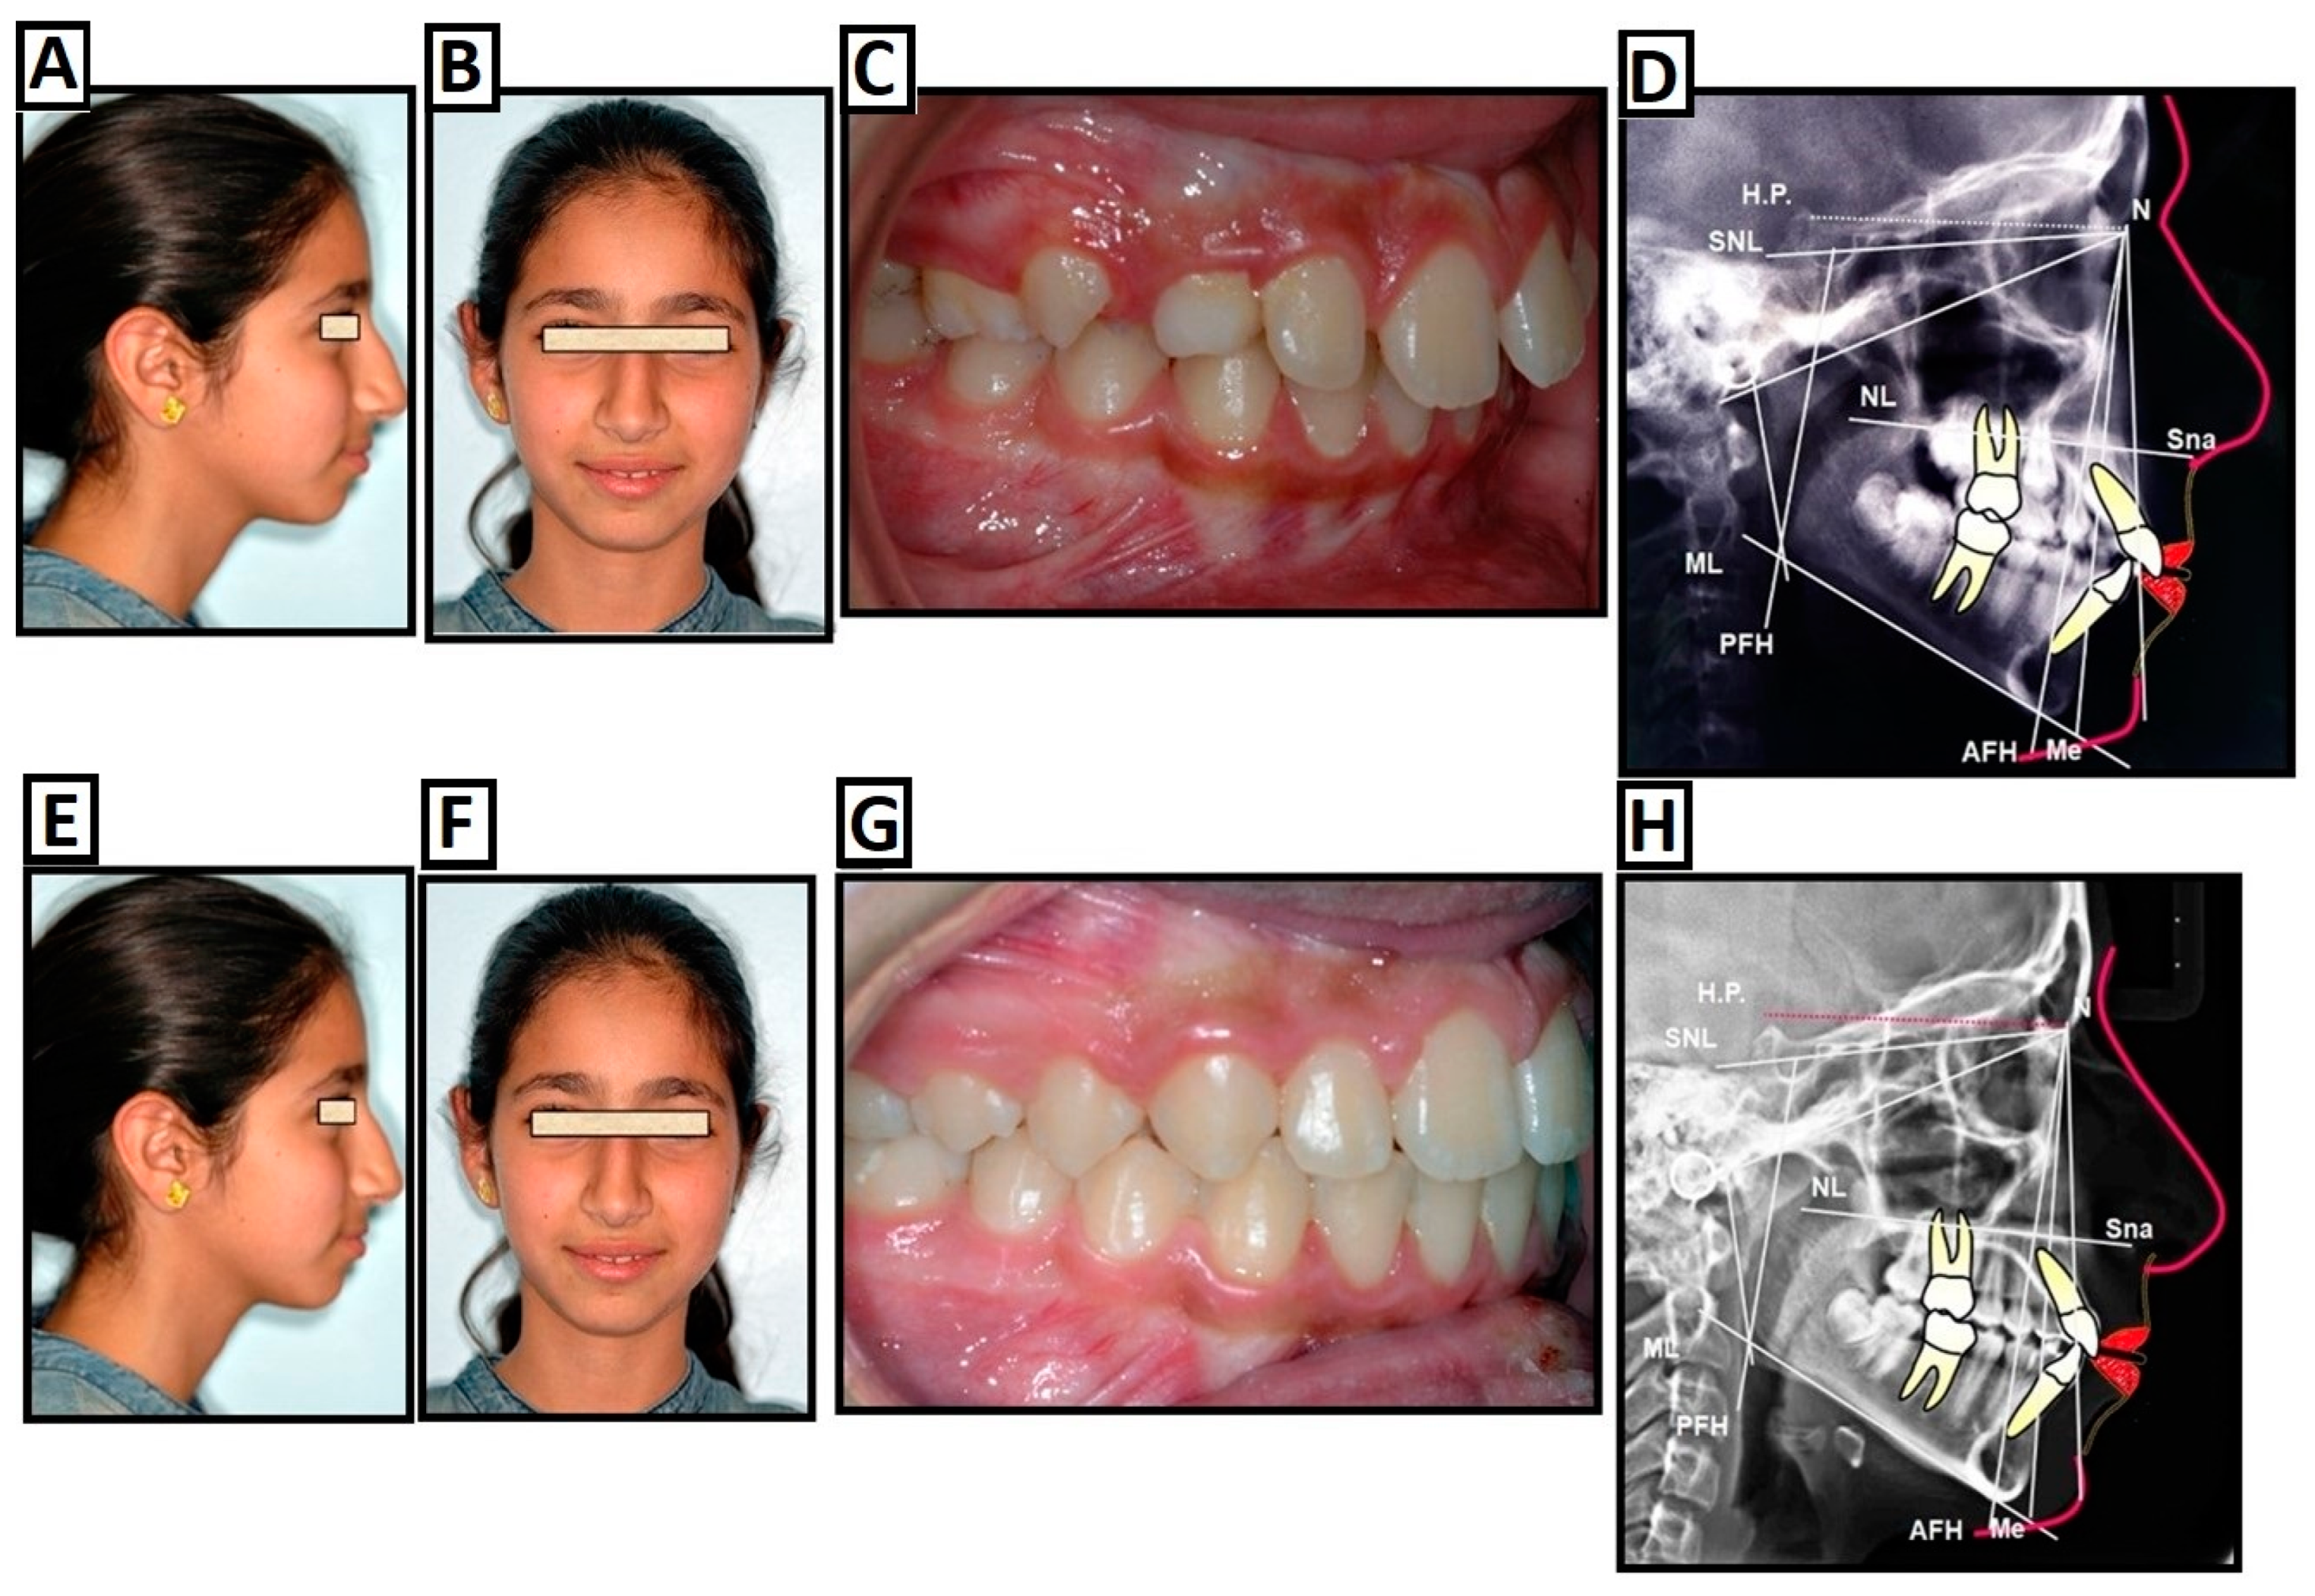 Adult patient with Class II, Div. 2 malocclusion and collapse of the